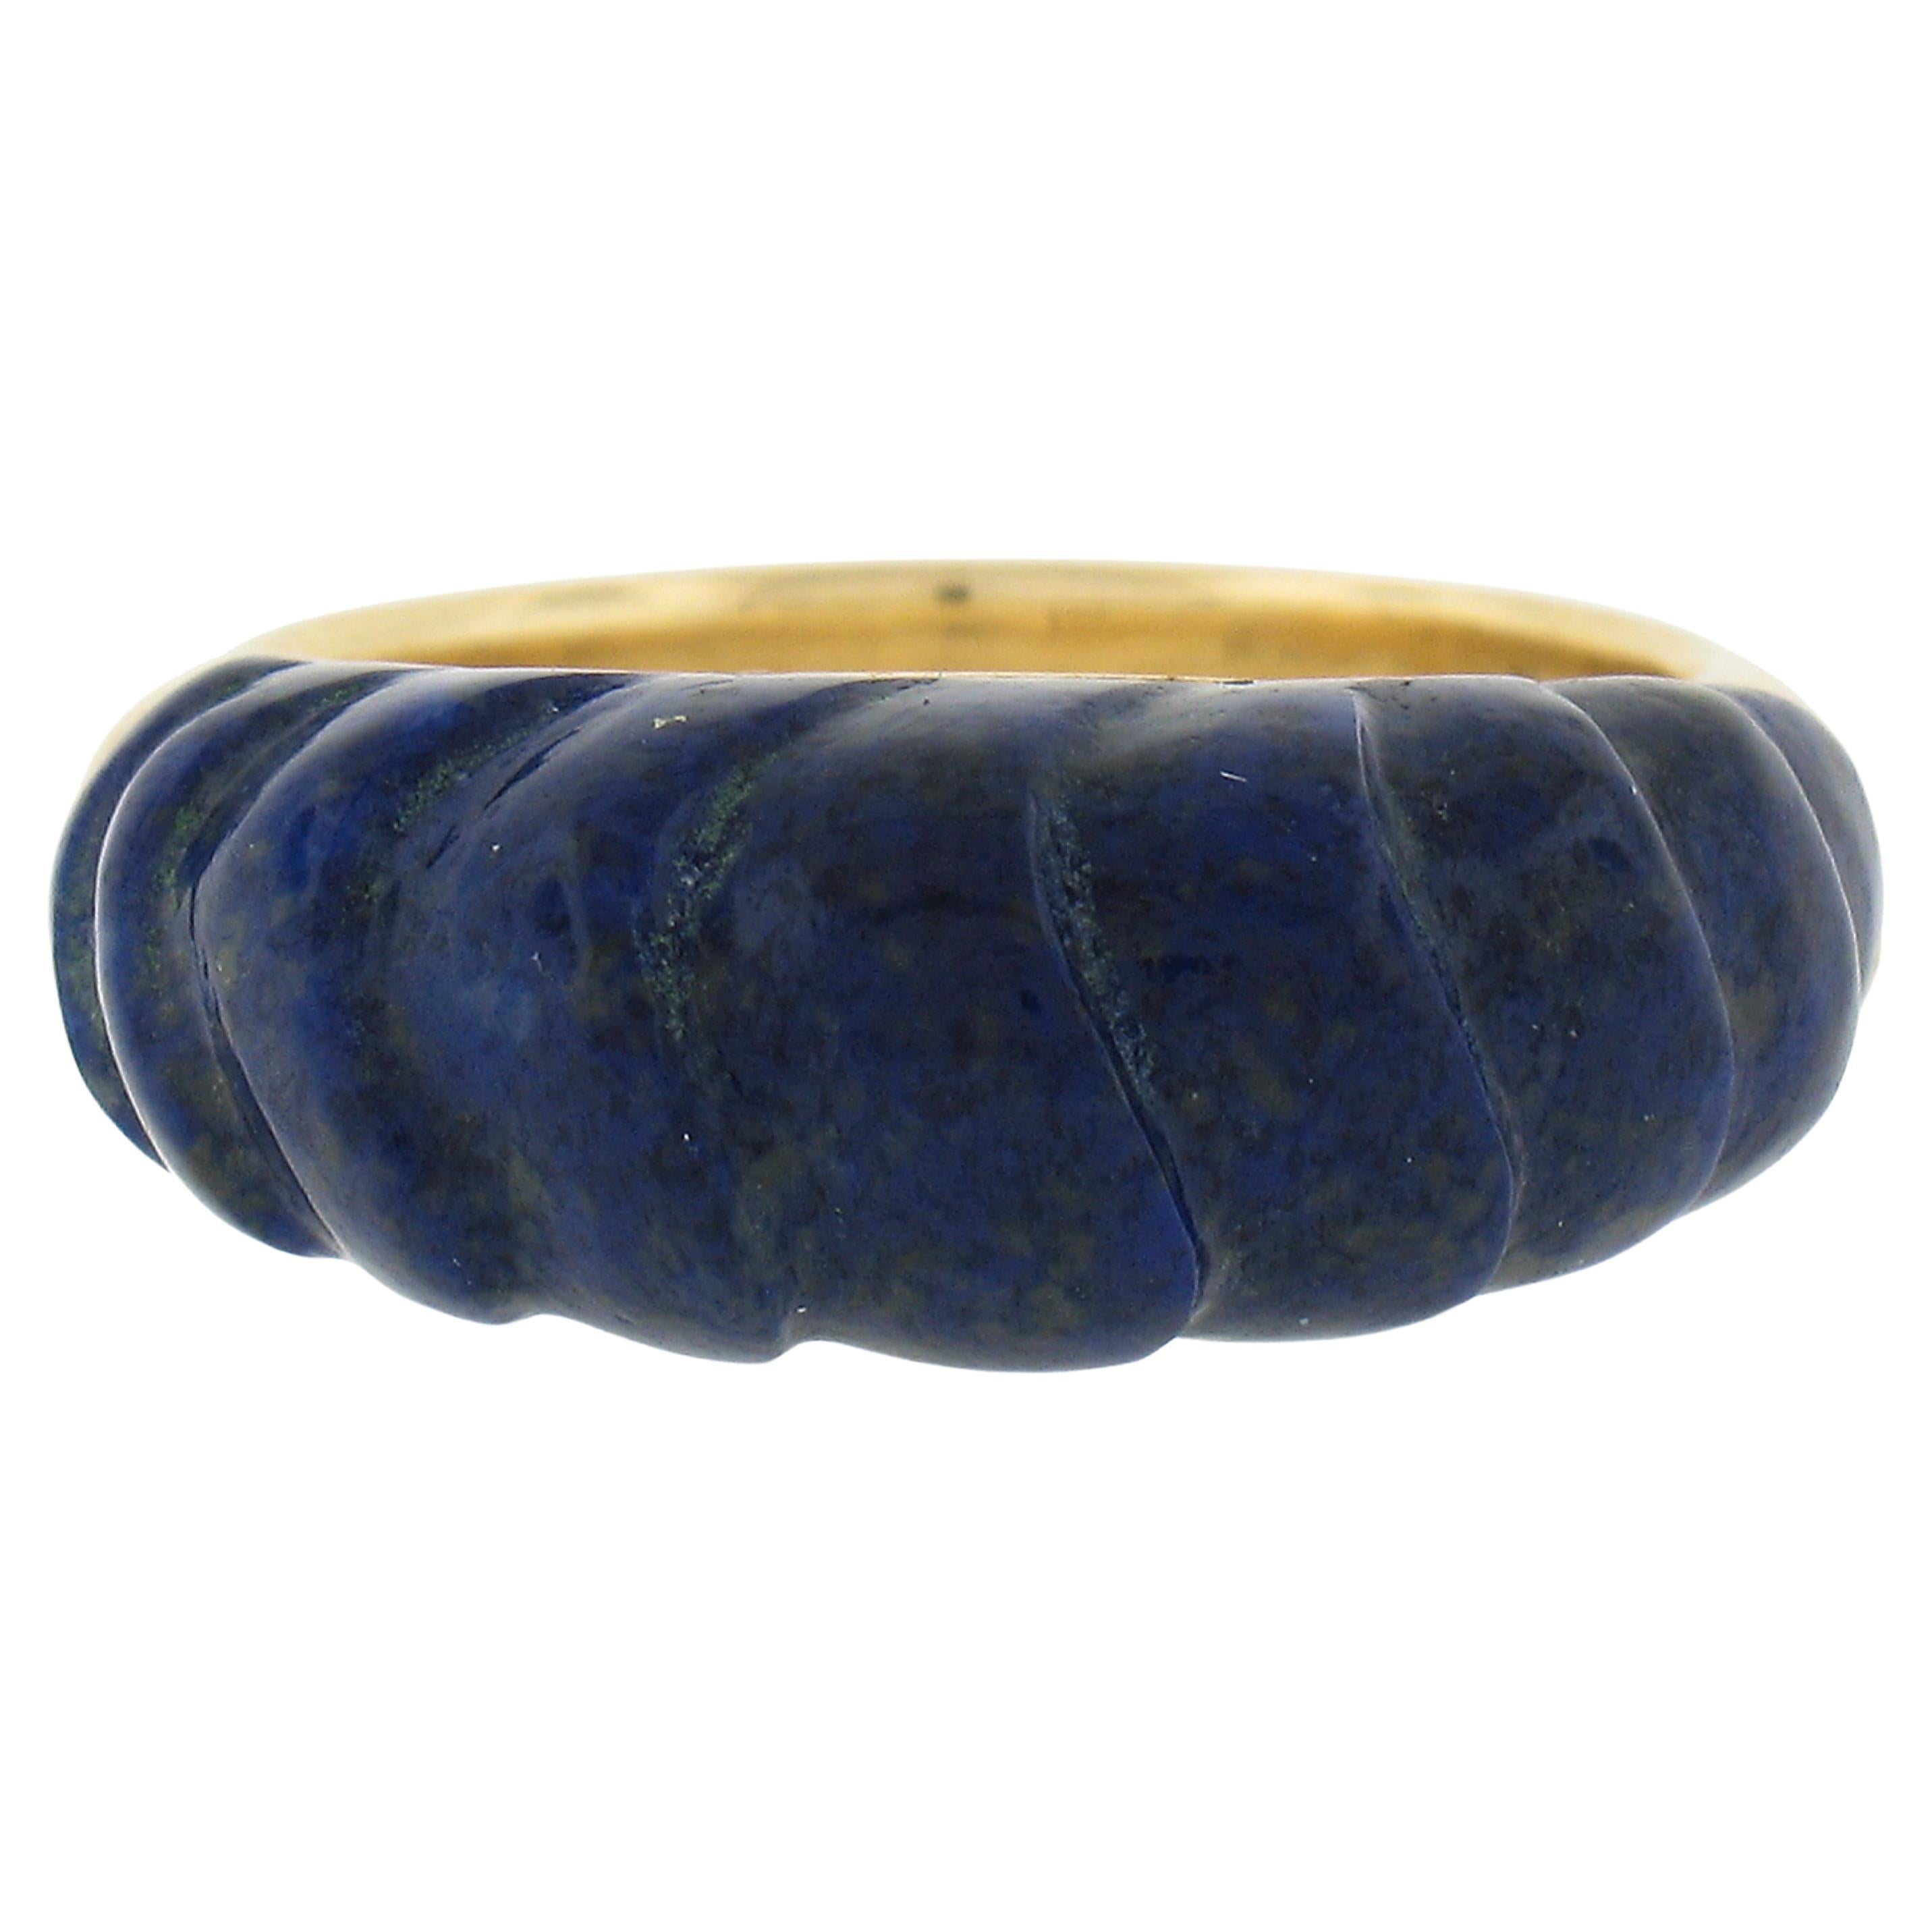 Solid 14k Yellow Gold Inlaid Carved Lapis High Dome Bombe Band Ring Size 5.5